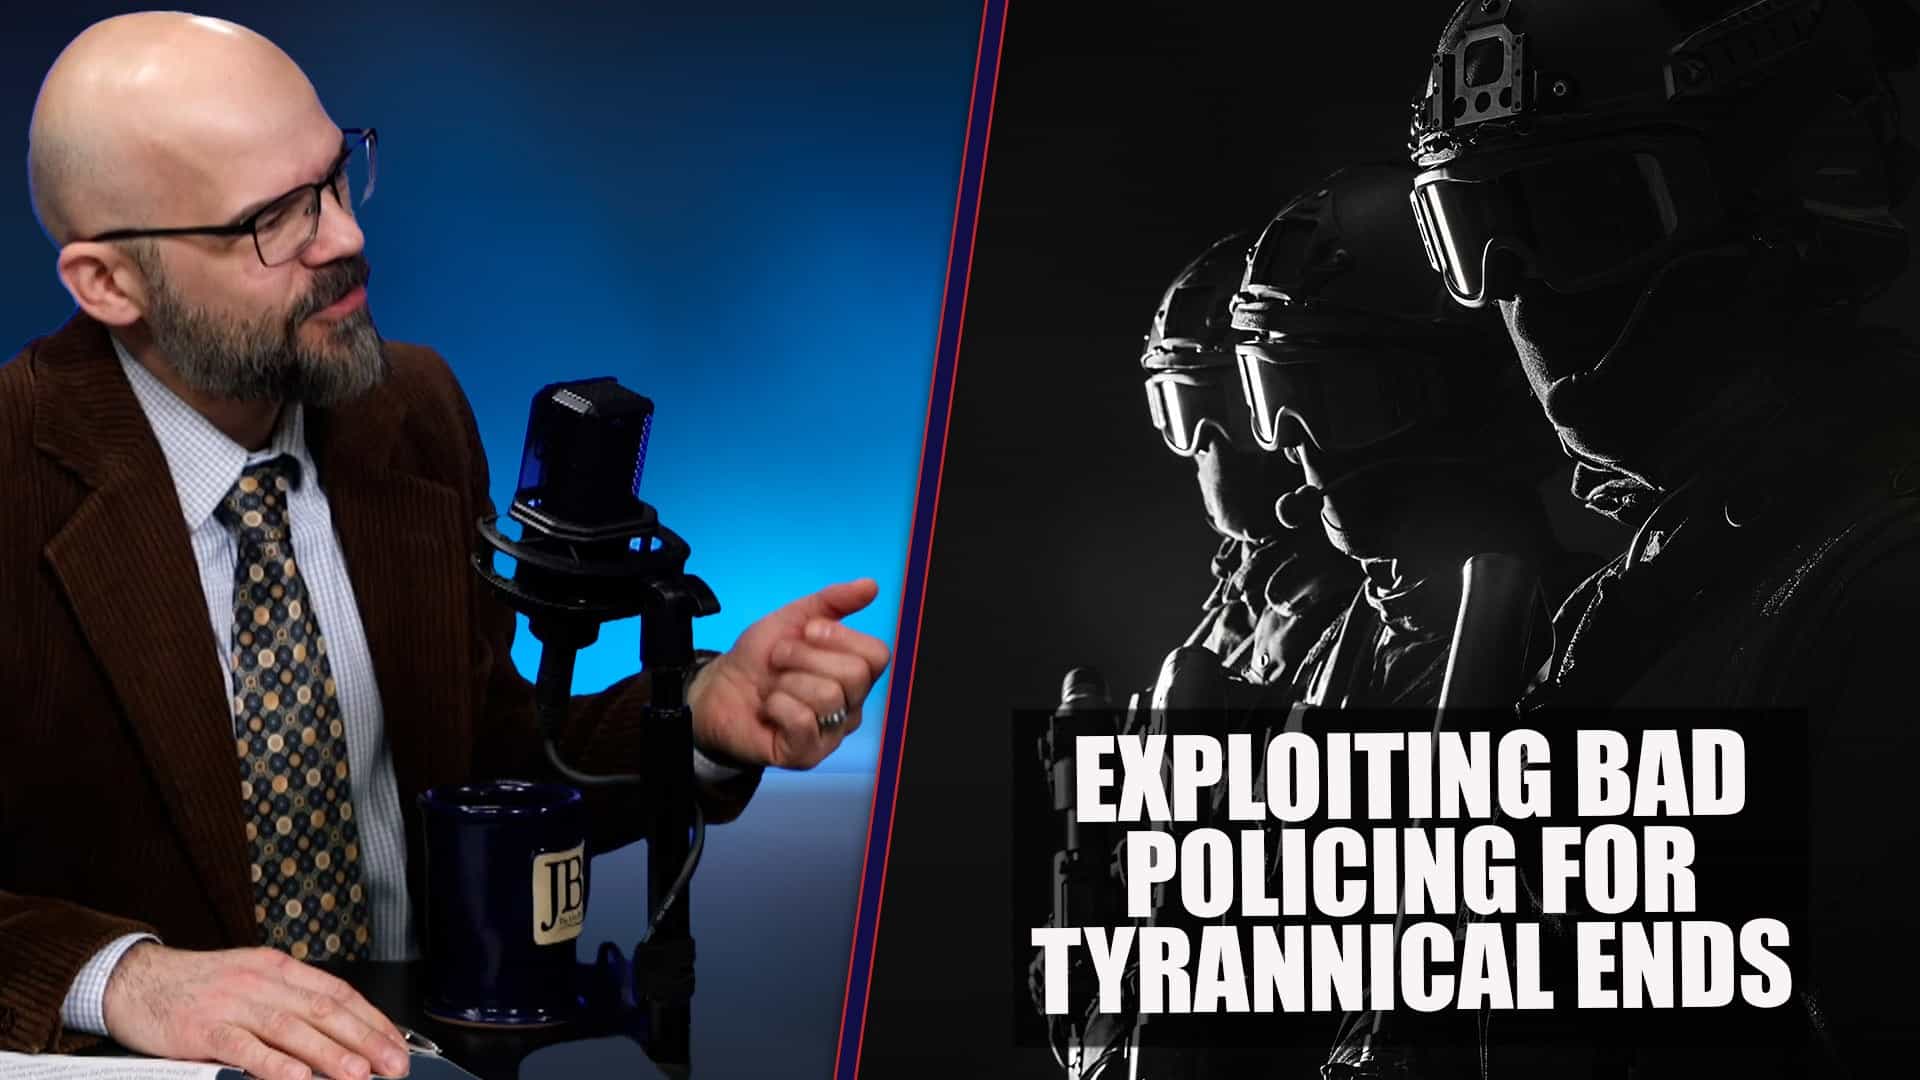 Exploiting Bad Policing for Tyrannical Ends - The New American